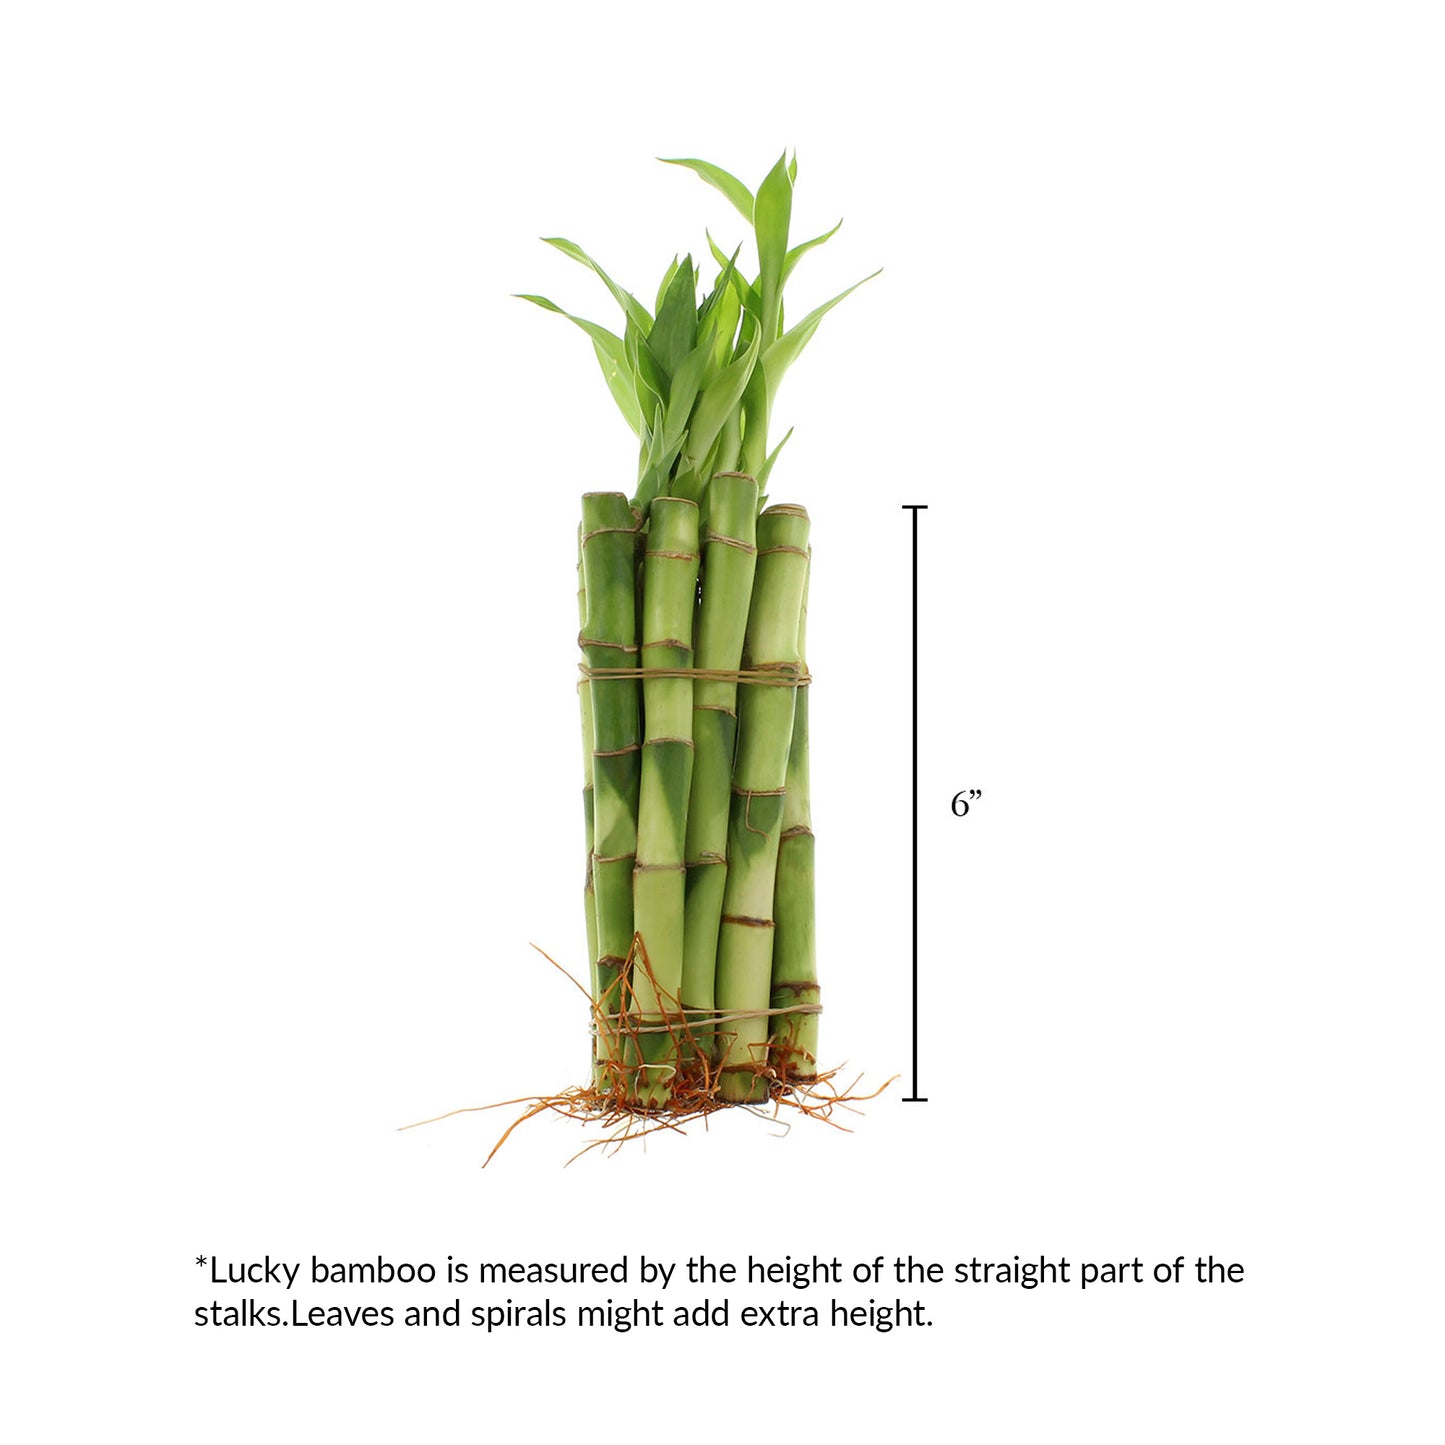 6" Indoor Lucky Bamboo Plant Straight Stalks | Bundles of 10 & 100